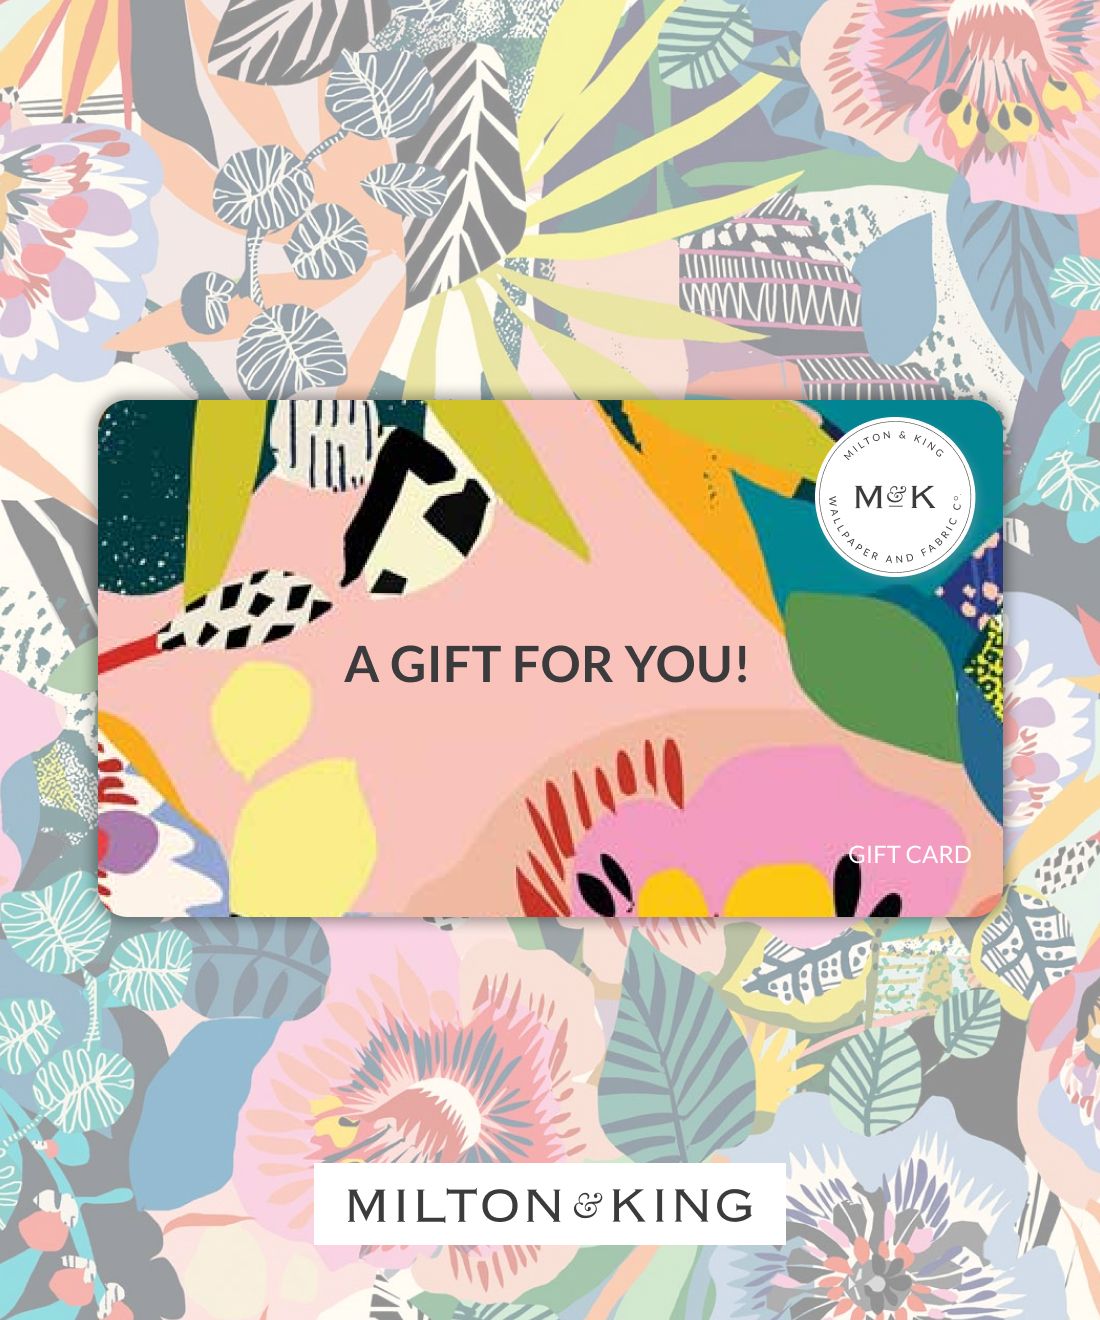 Milton & King - A Gift for you! Gift Card